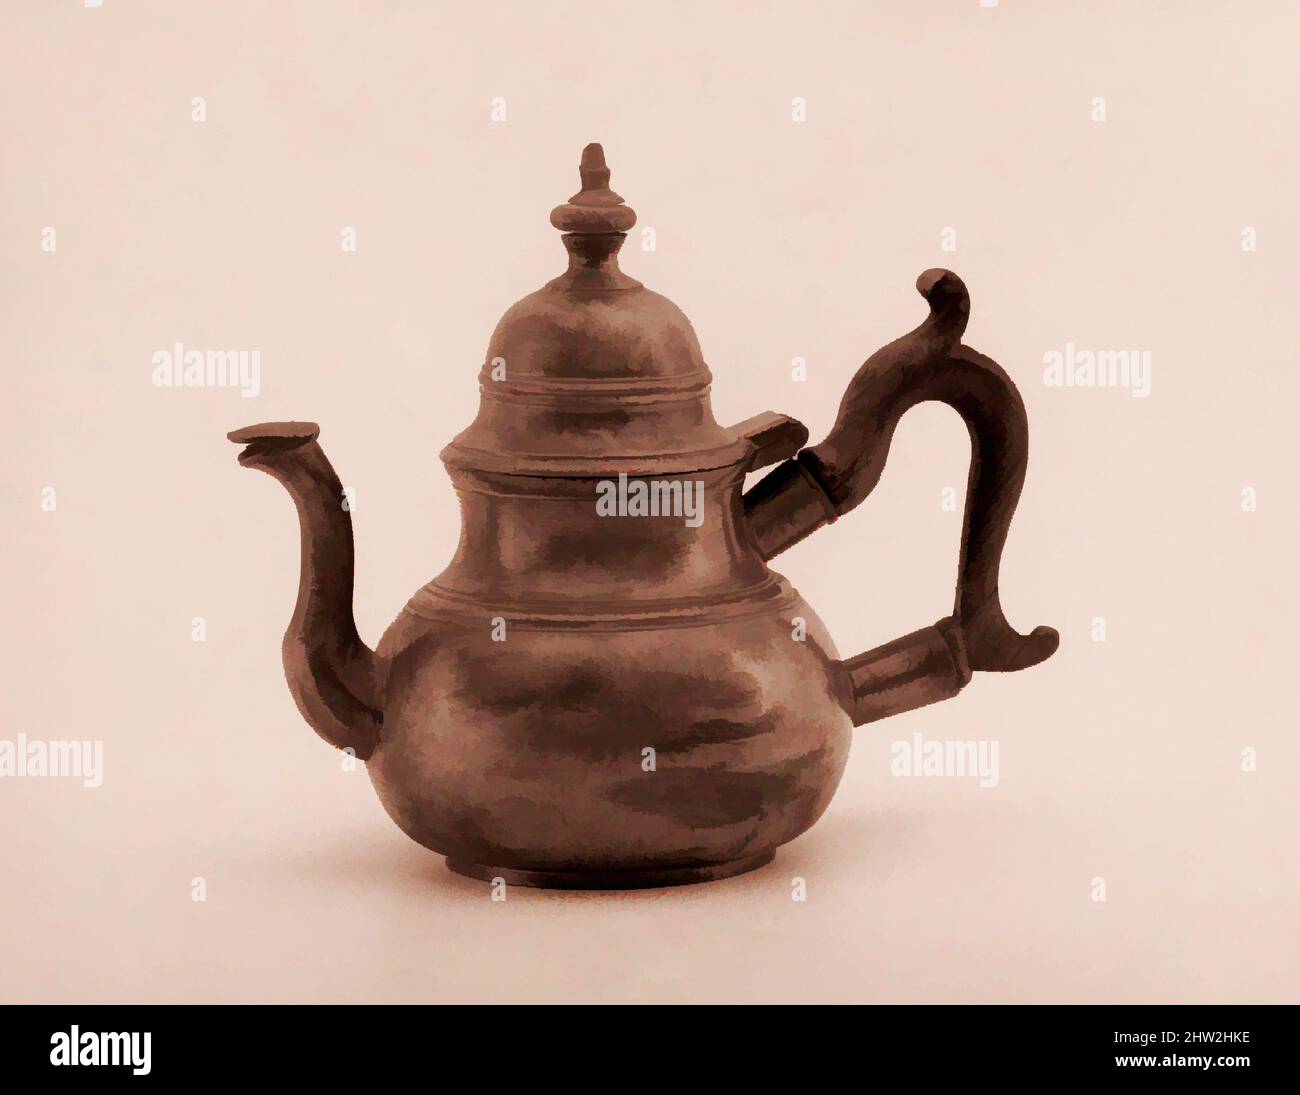 Art inspired by Teapot, 1760–80, Made in England, Pewter, wood, 6 3/8 x 7 1/4 in. (16.2 x 18.4 cm), Metal, T. S, Classic works modernized by Artotop with a splash of modernity. Shapes, color and value, eye-catching visual impact on art. Emotions through freedom of artworks in a contemporary way. A timeless message pursuing a wildly creative new direction. Artists turning to the digital medium and creating the Artotop NFT Stock Photo